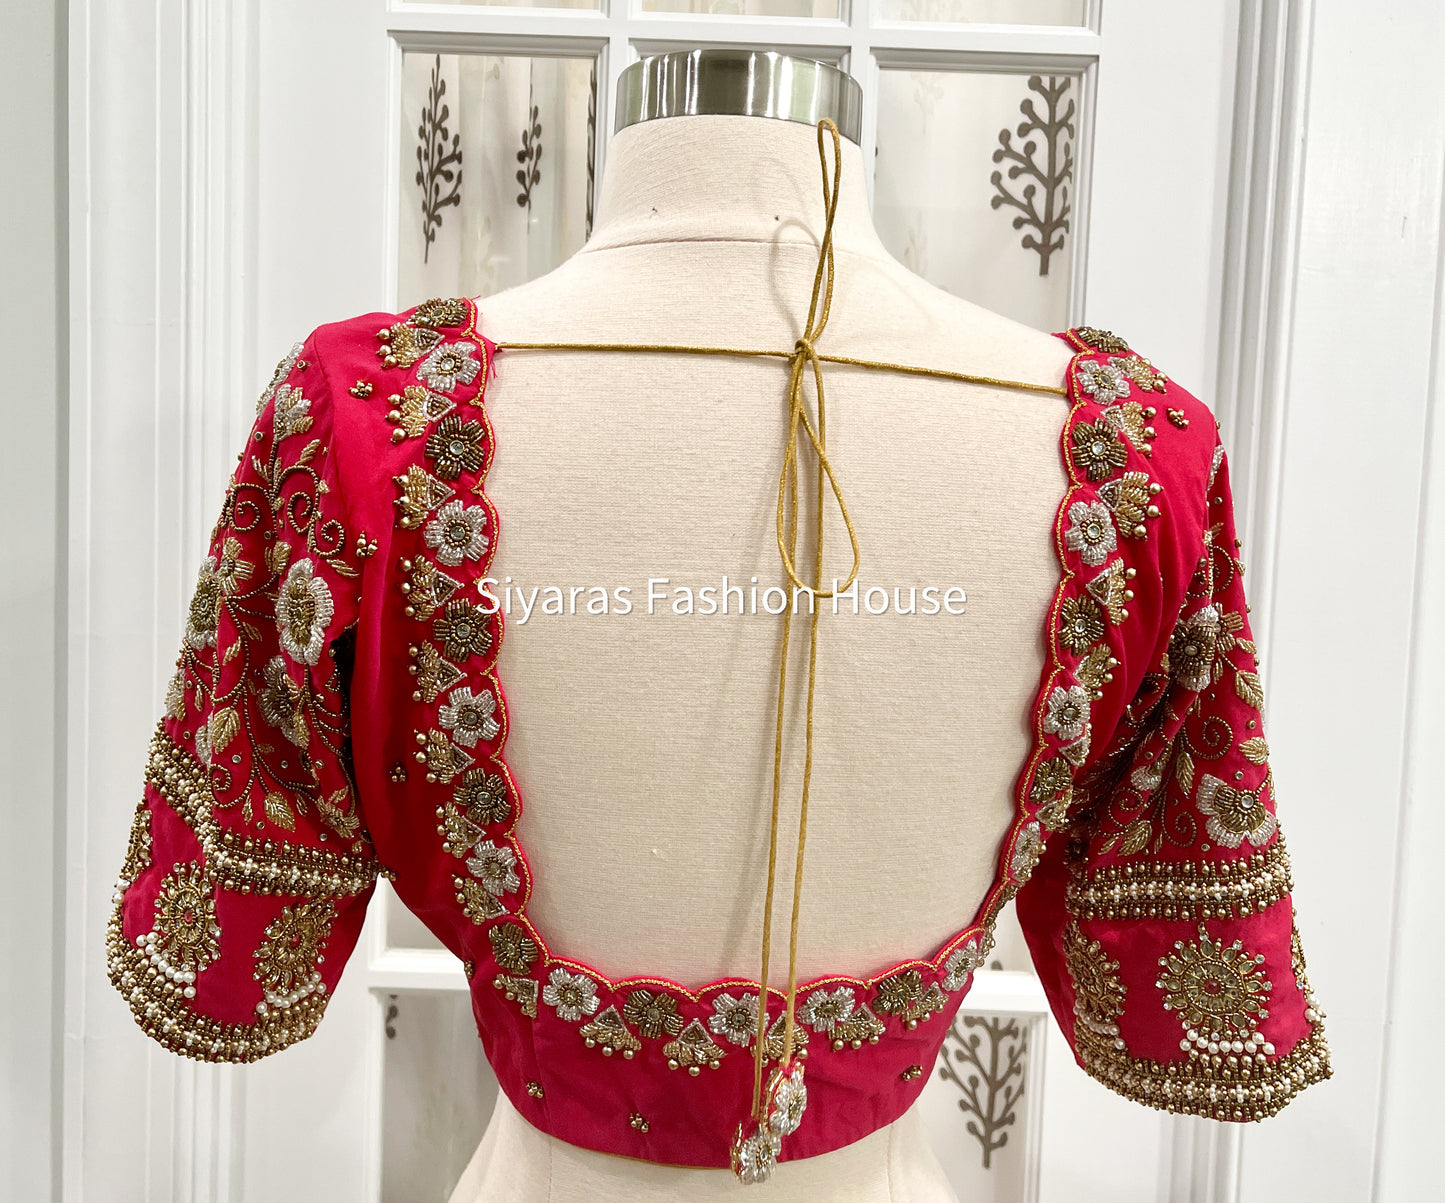 Beautiful HandMade Maggam/Aari work Blouse fully stitched for Function/PartyWear